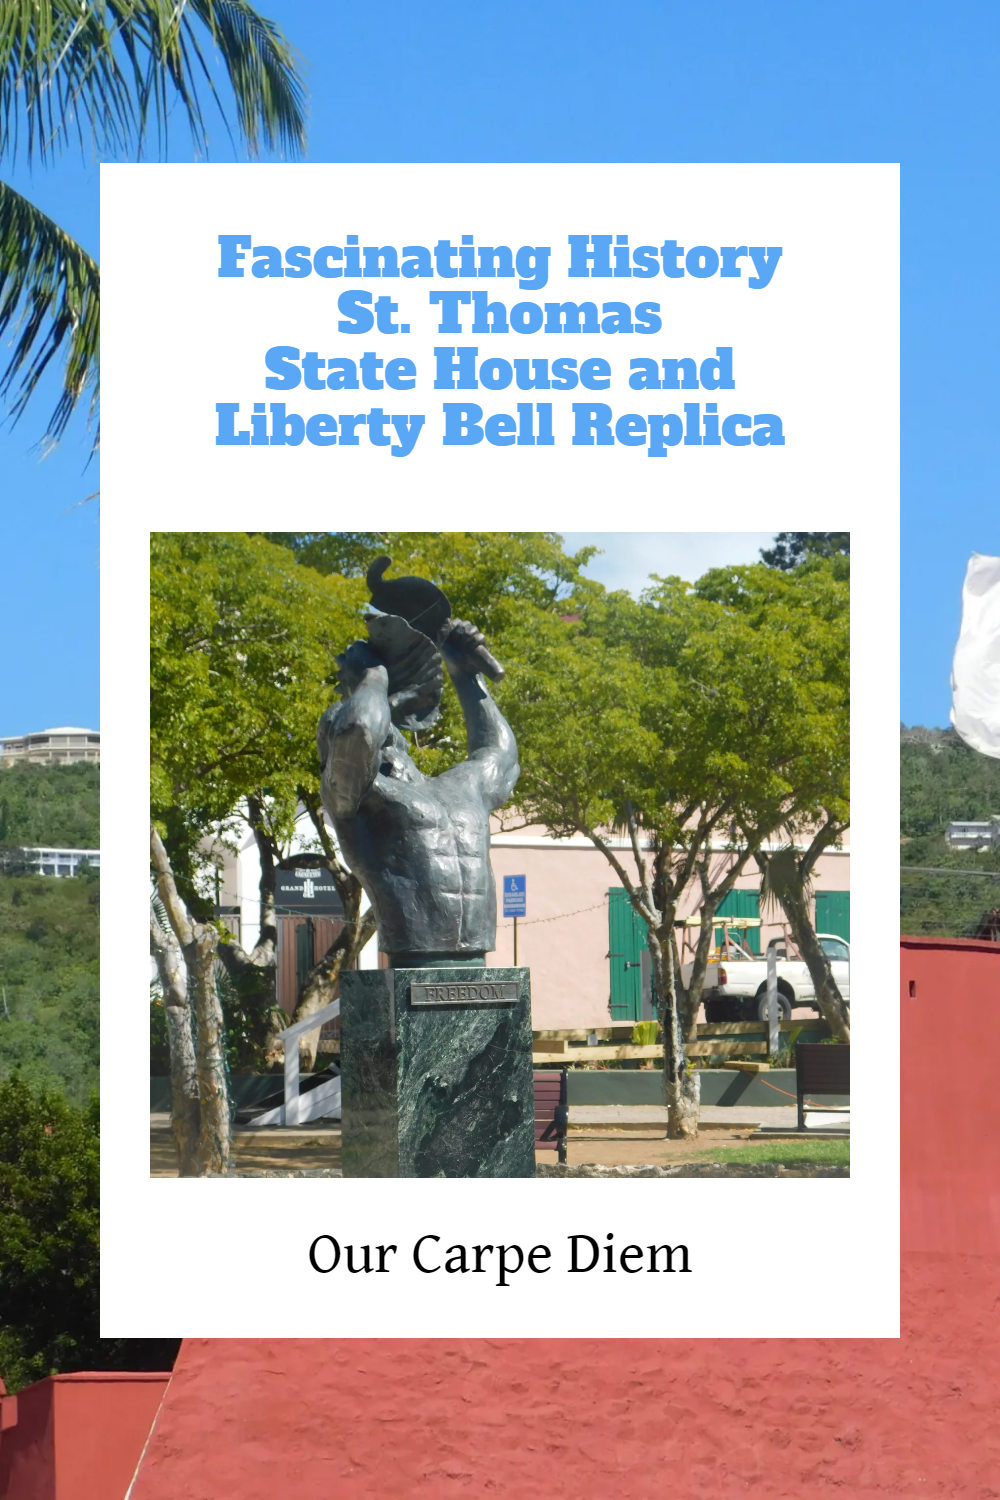 Did you know that the US Virgin Islands have a State House and Liberty Bell Replica too? Let's dive into the history, culture, and significance of this incredible destination. Take a look and learn something new! #USVirgins #Culture #History #Vacation